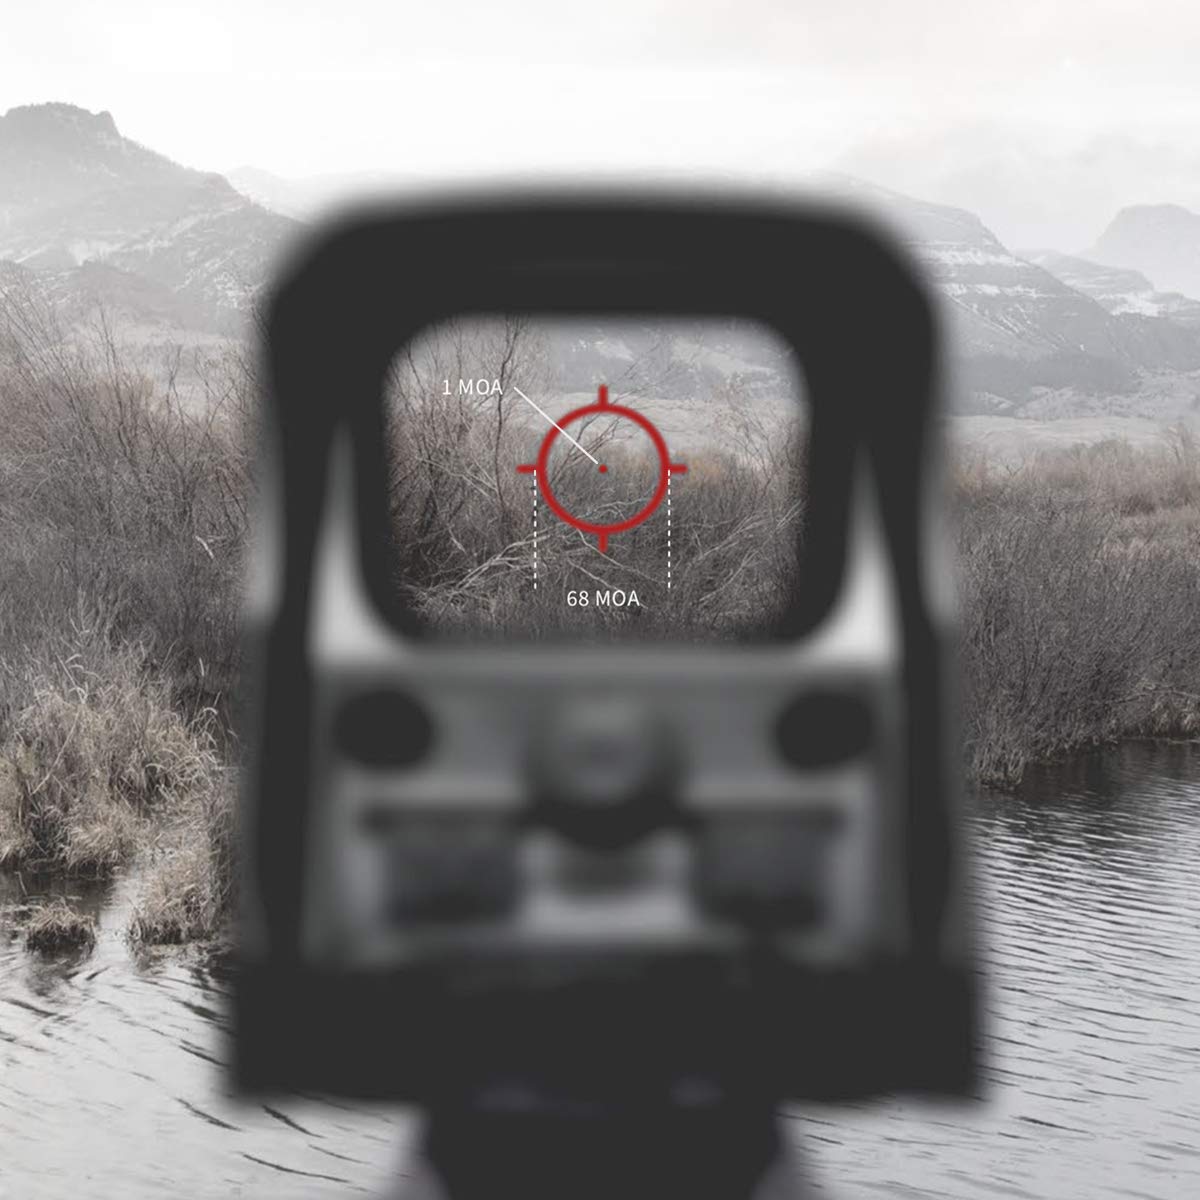 EOTECH Holographic Weapon Sight 65 MOA Circle with 1 MOA Dot  - XPS2-0